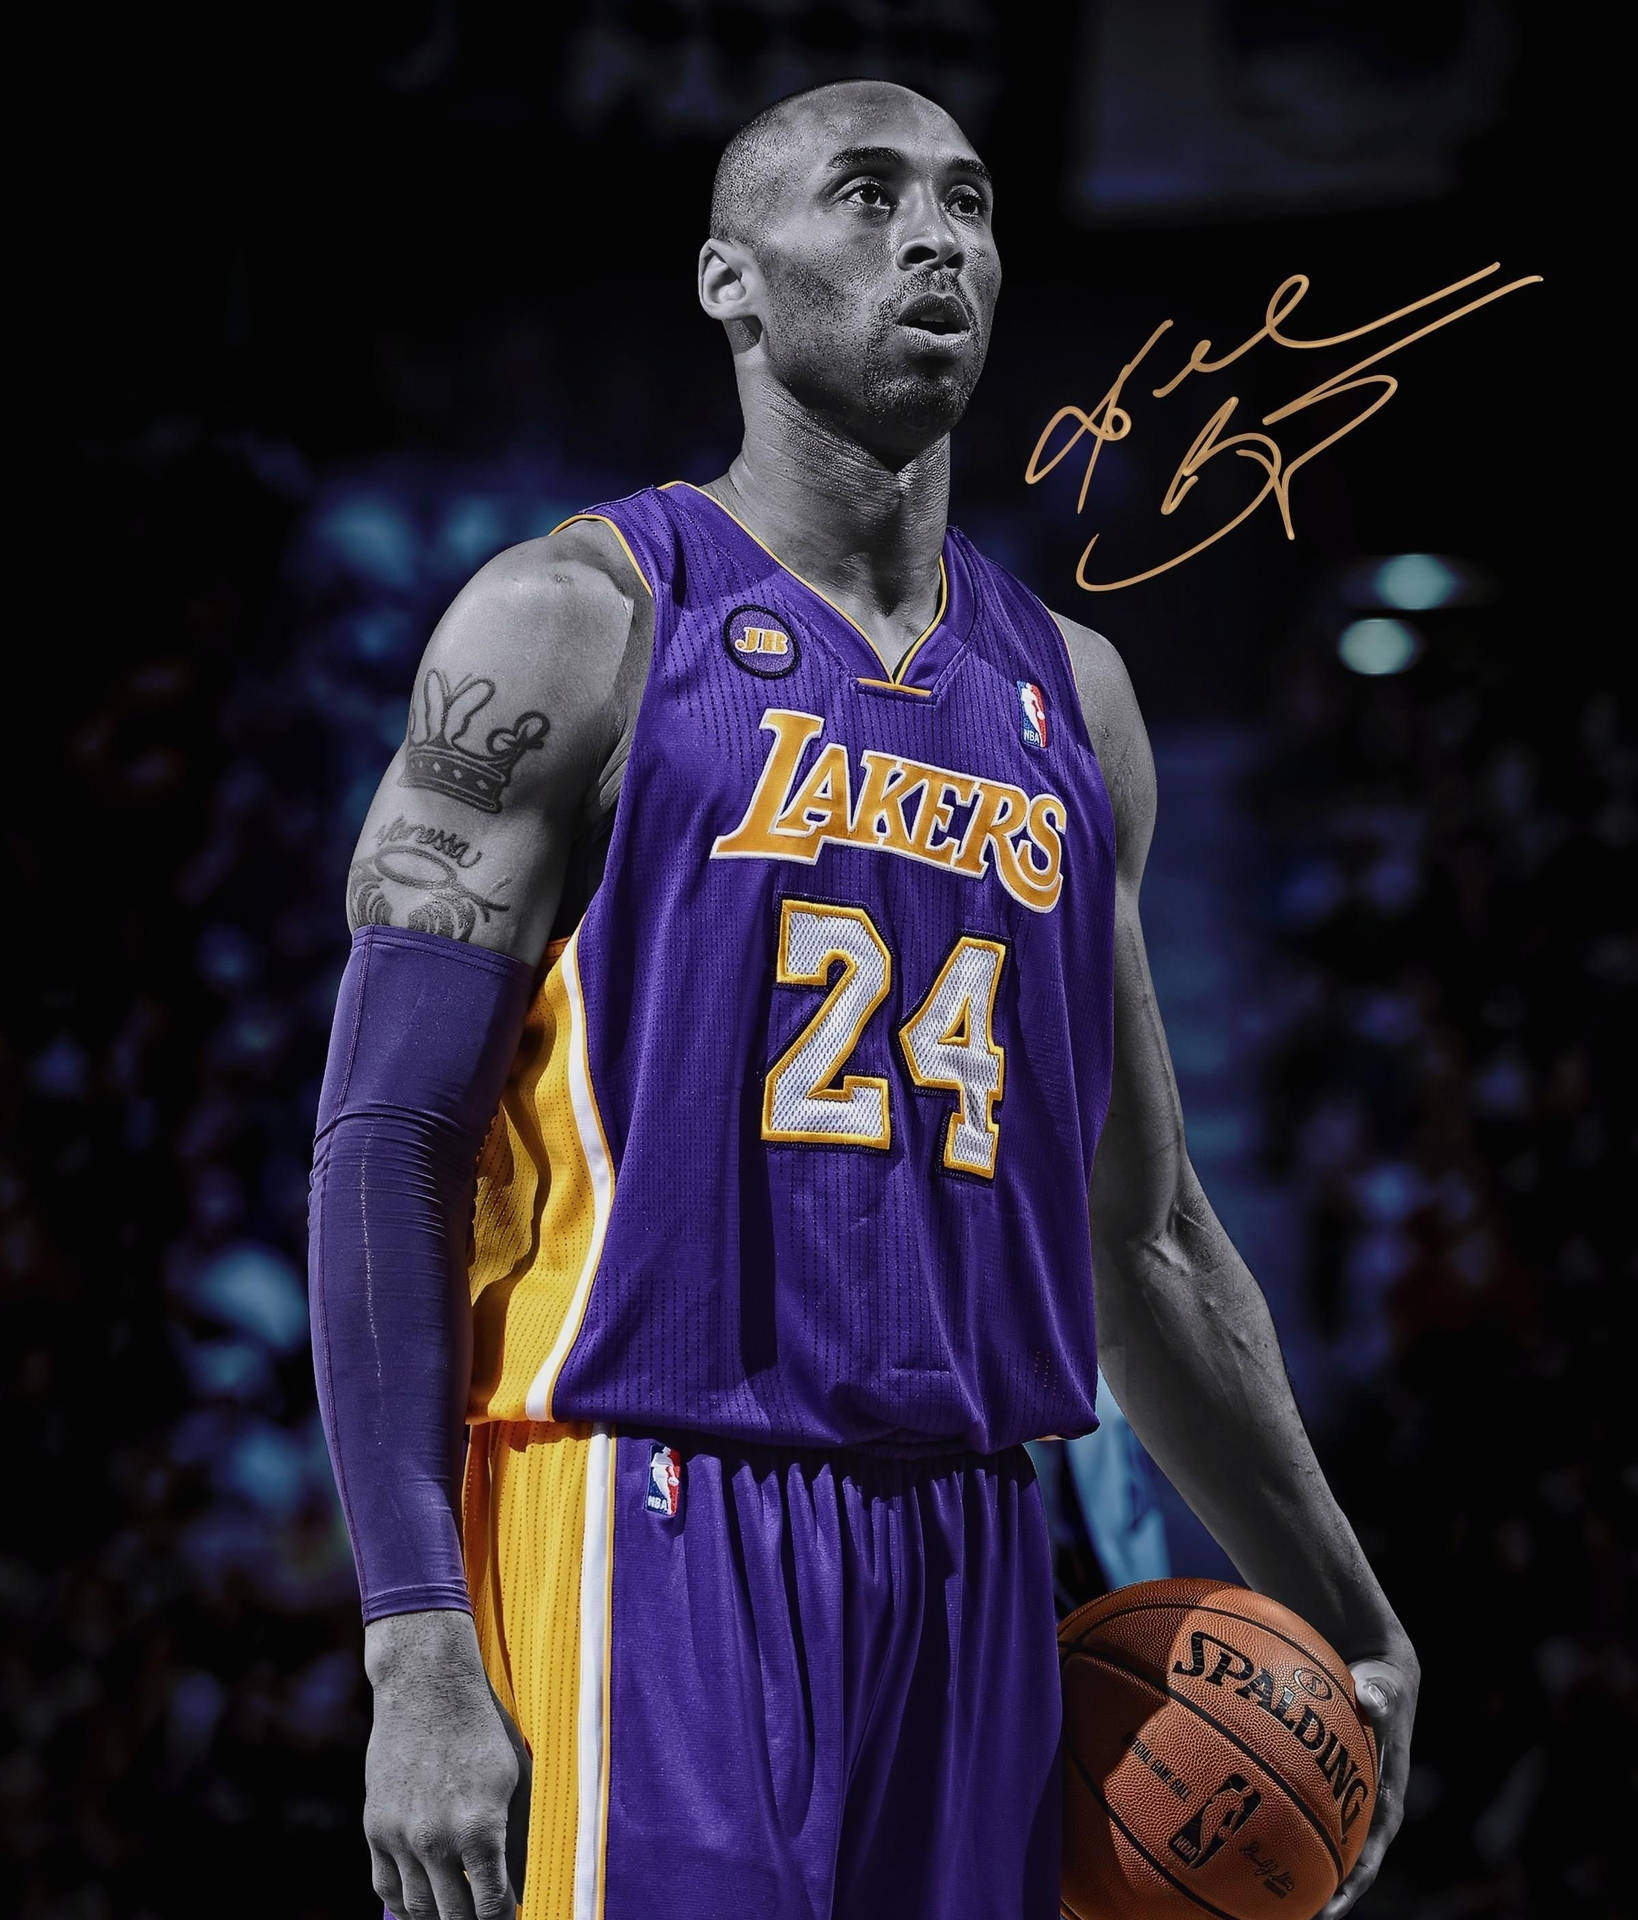 Aesthetic Kobe Bryant Shot With An Autograph Wallpaper